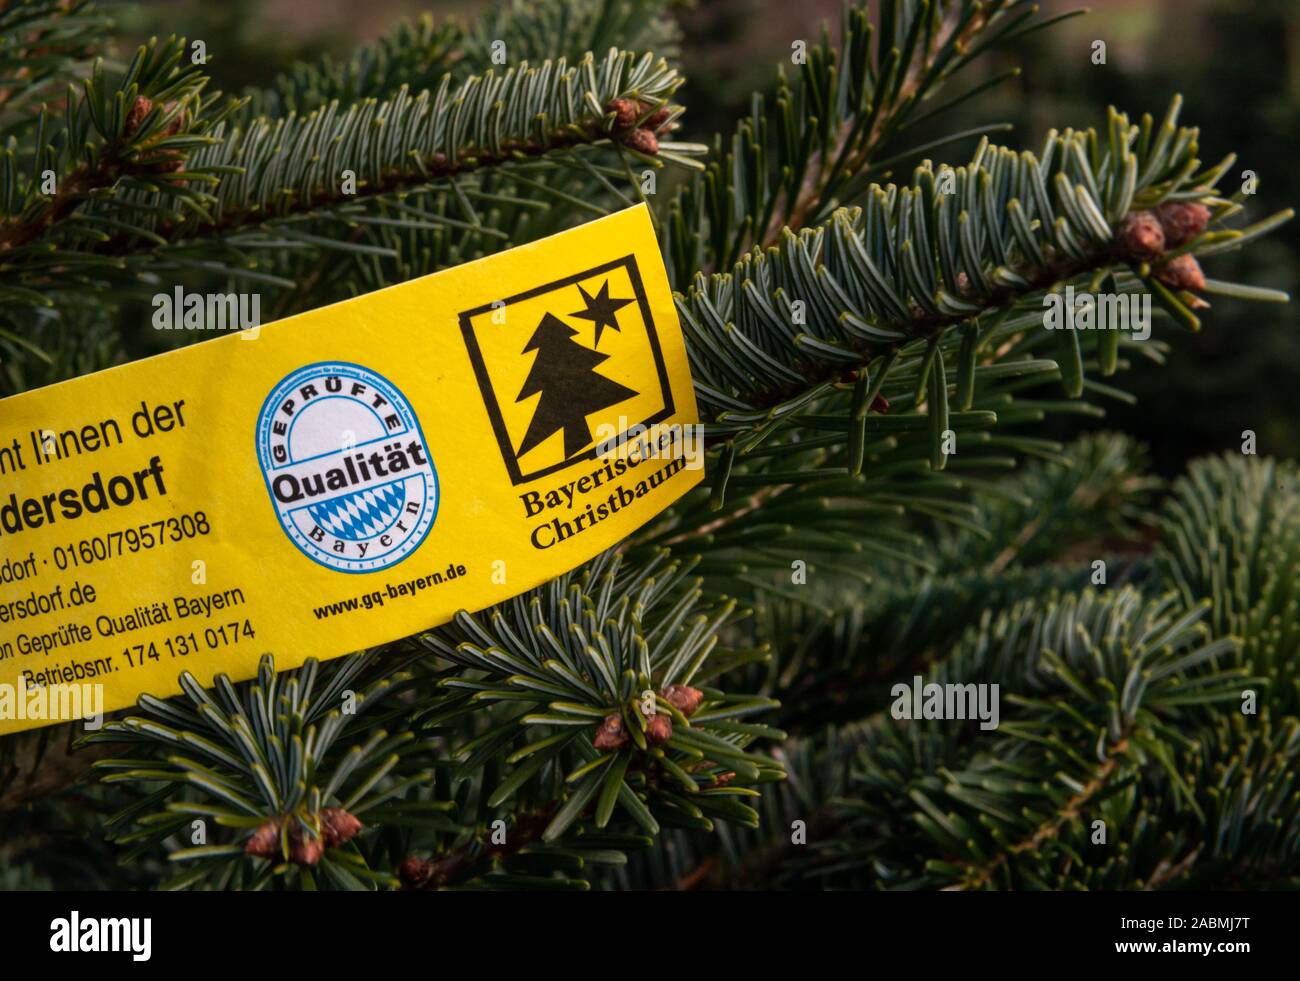 Markt Indersdorf, Germany. 28th Nov, 2019. A seal of quality with the inscription 'Geprüfte Qualität Bayern' hangs on a fir tree during the symbolic opening of the Christmas tree season. According to the ministry, about four million Christmas trees are sold in Bavaria every year. Credit: Peter Kneffel/dpa/Alamy Live News Stock Photo